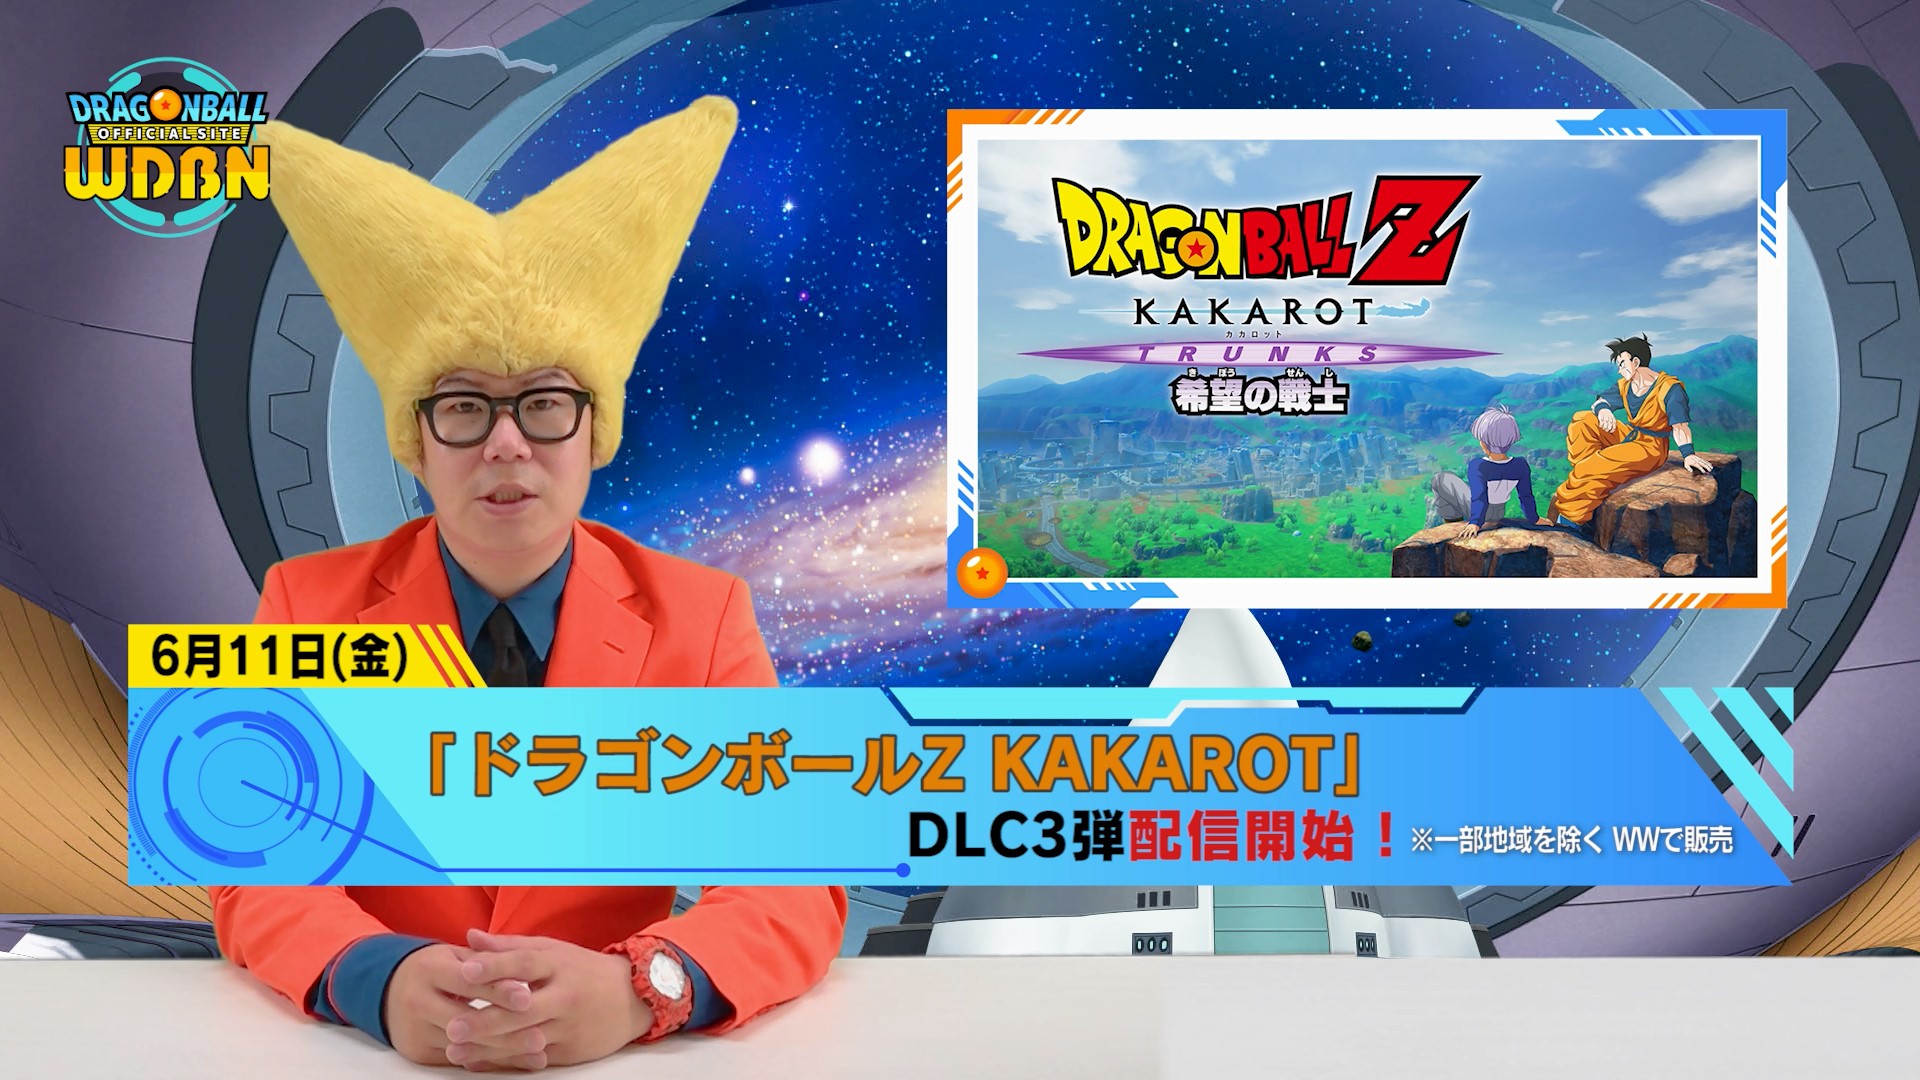 [June 7th] Weekly Dragon Ball News Broadcast!